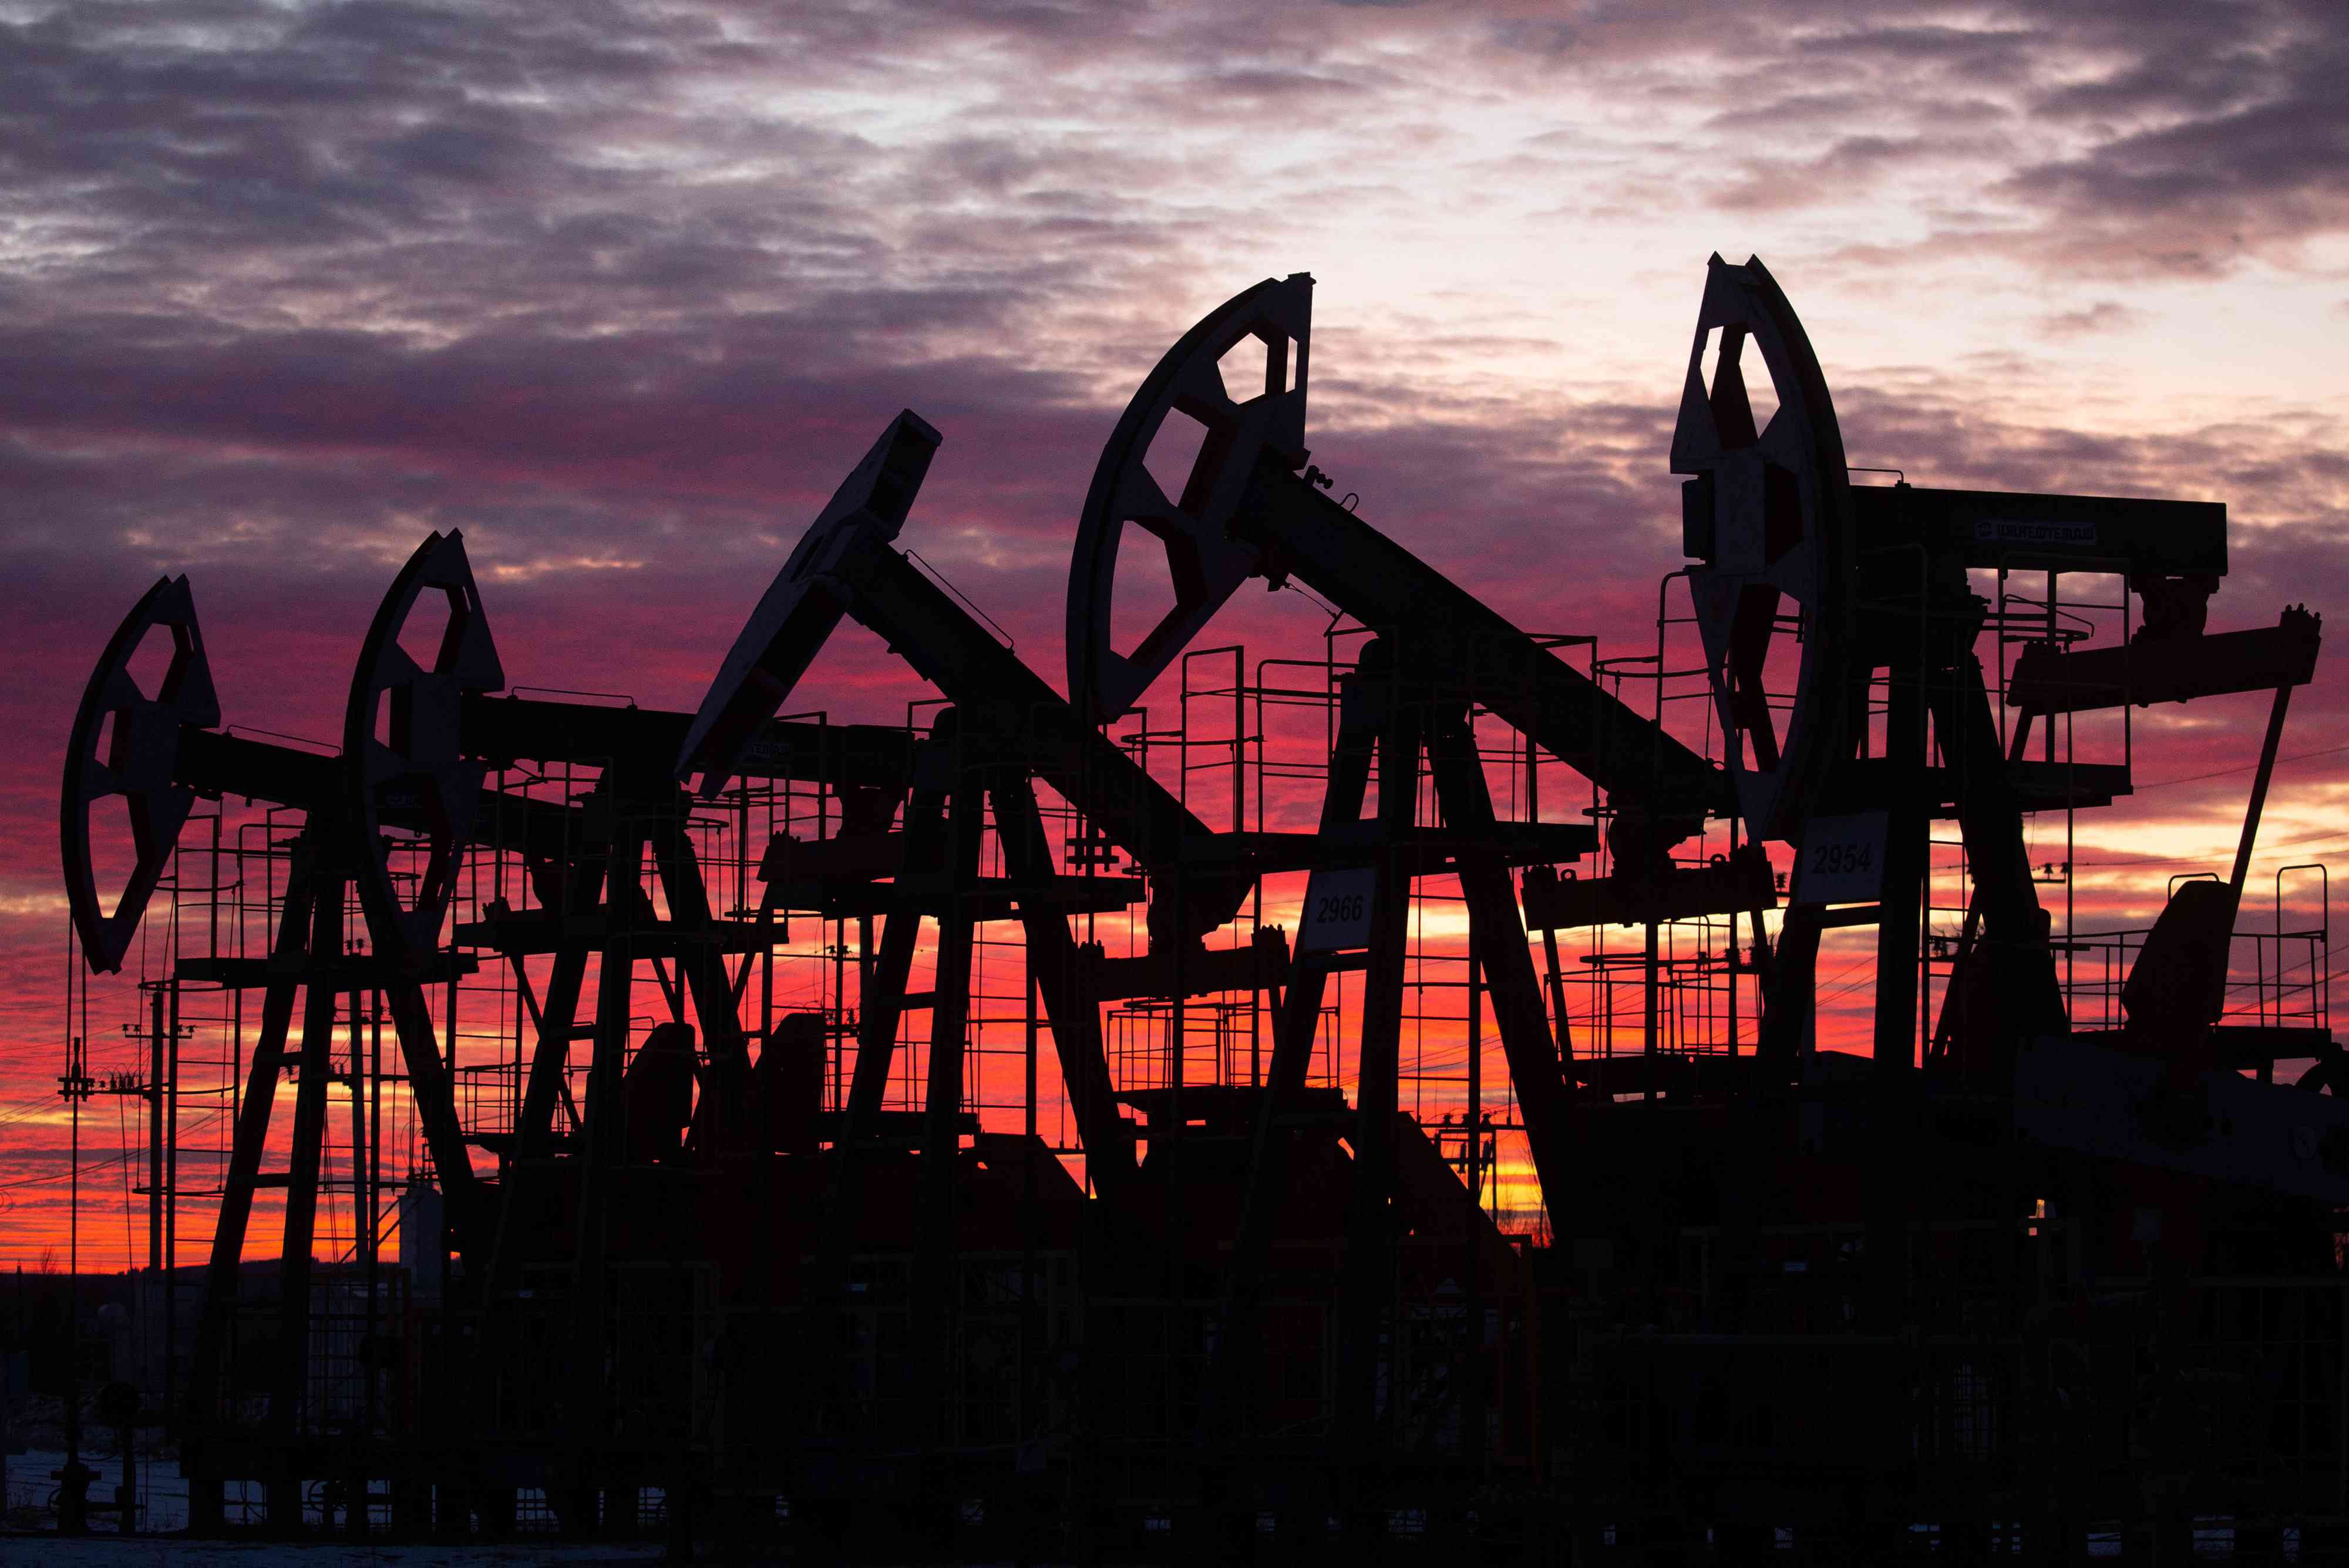 Oil pumping jacks in an oil field at sunset in Russia. 